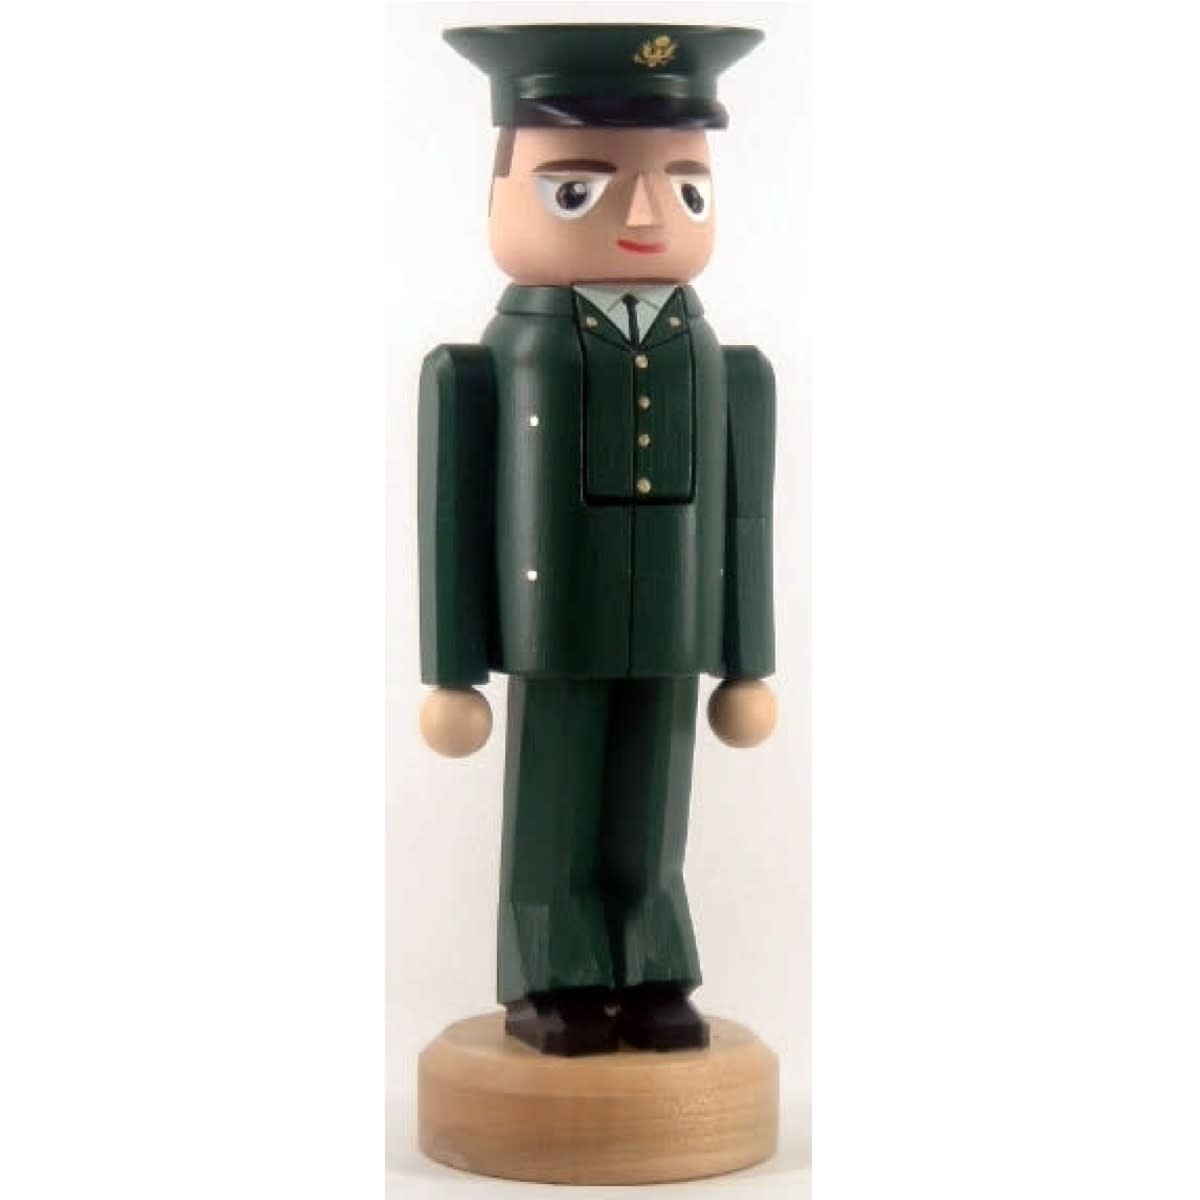 Junghanel Air Force  Nutcracker 11 inches